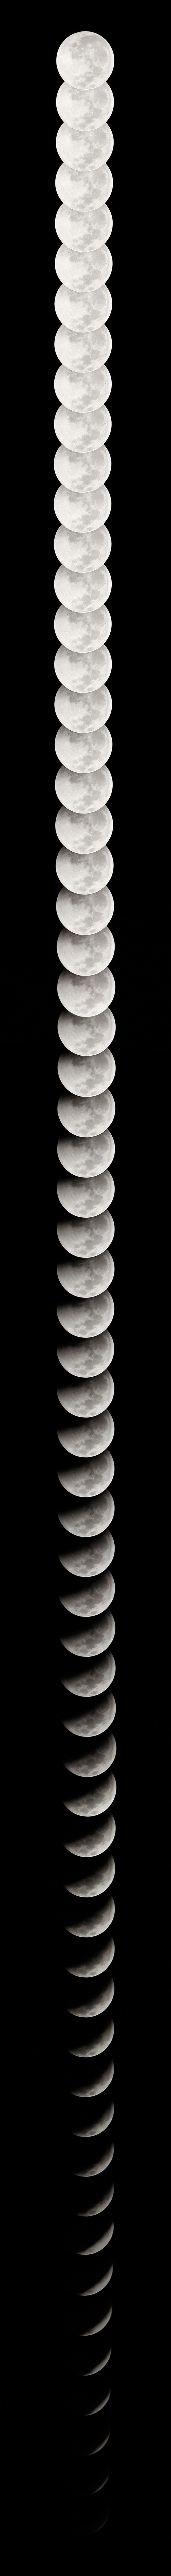 tall eclipse || Canon5D2/EF200f2.8L | 1/125s | f9 | ISO100